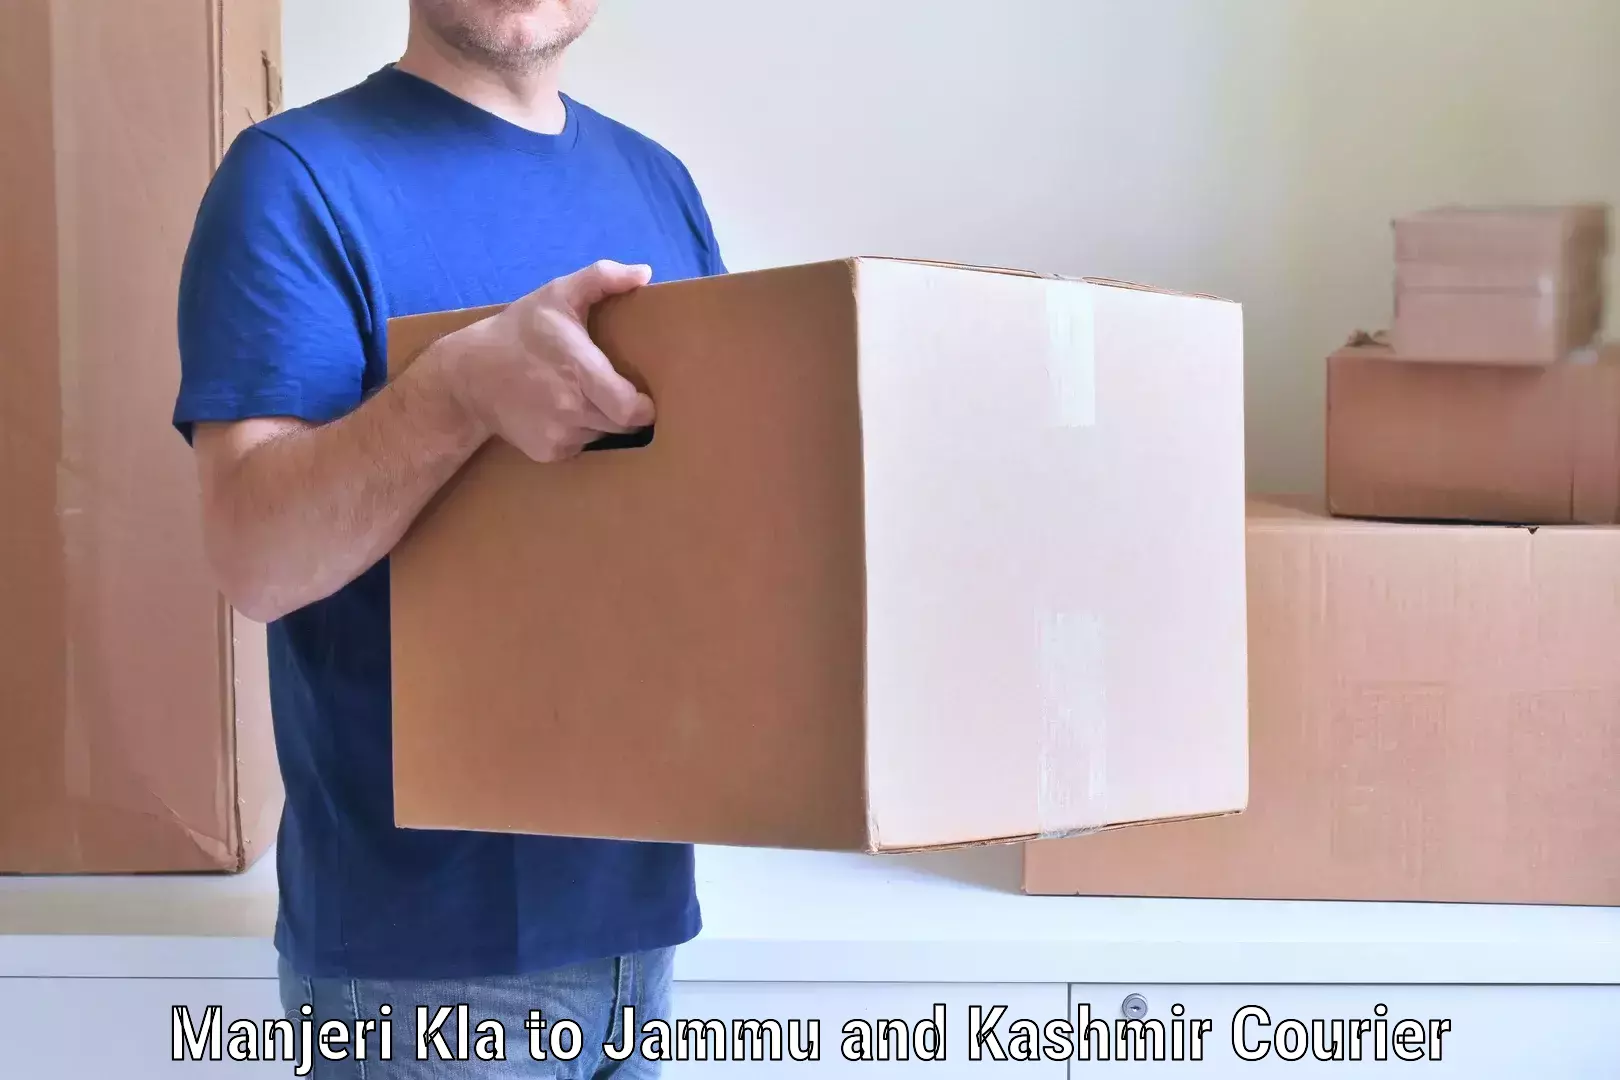 Professional movers and packers Manjeri Kla to Udhampur